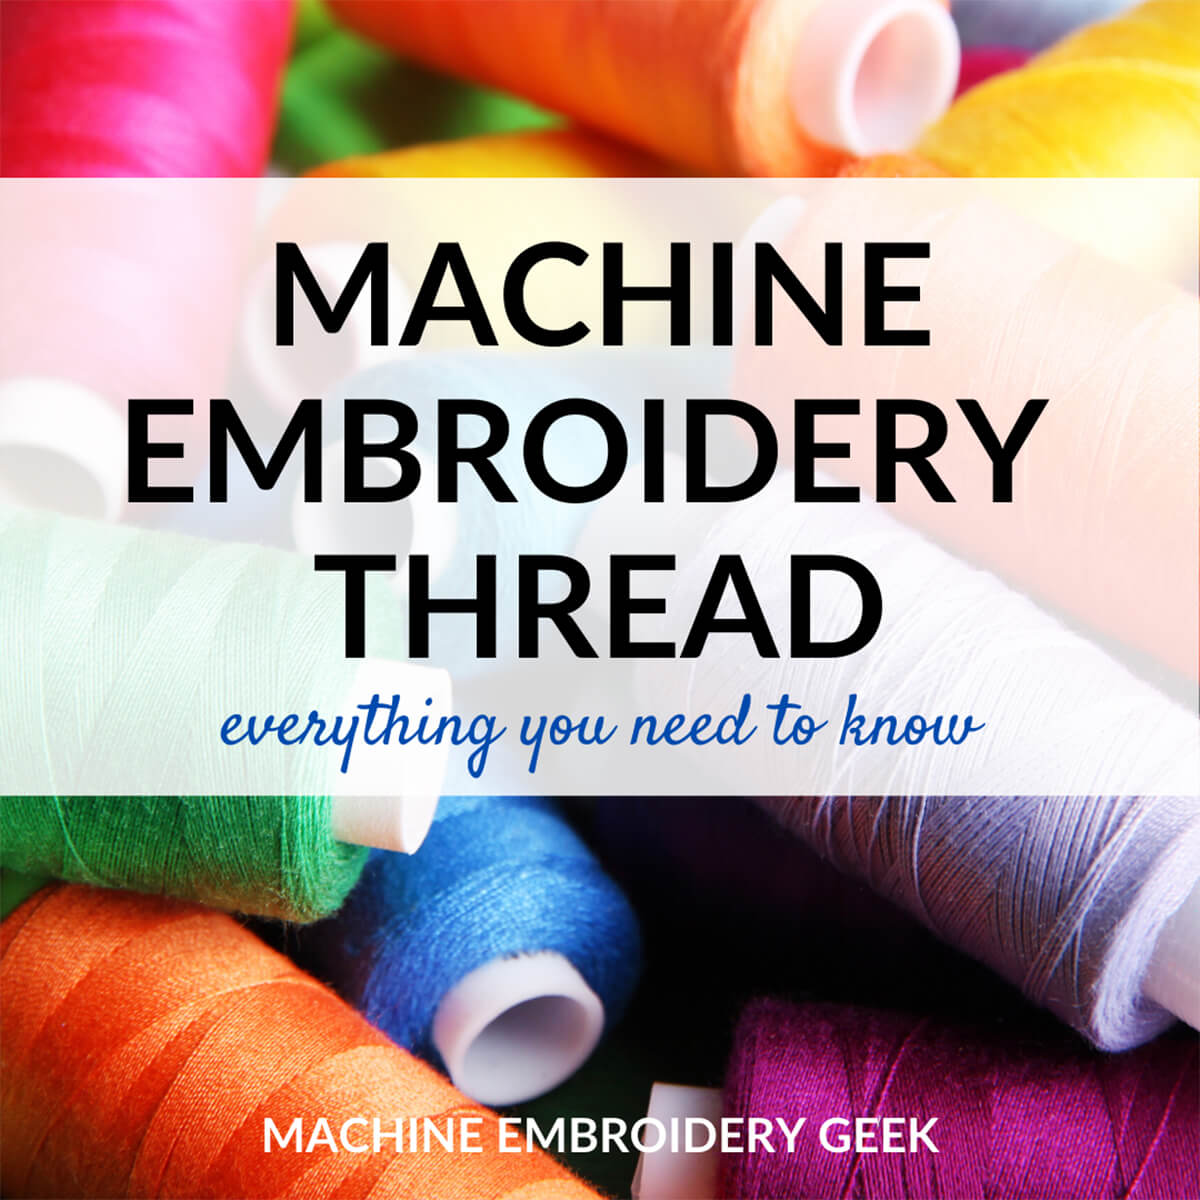 What is machine embroidery thread?